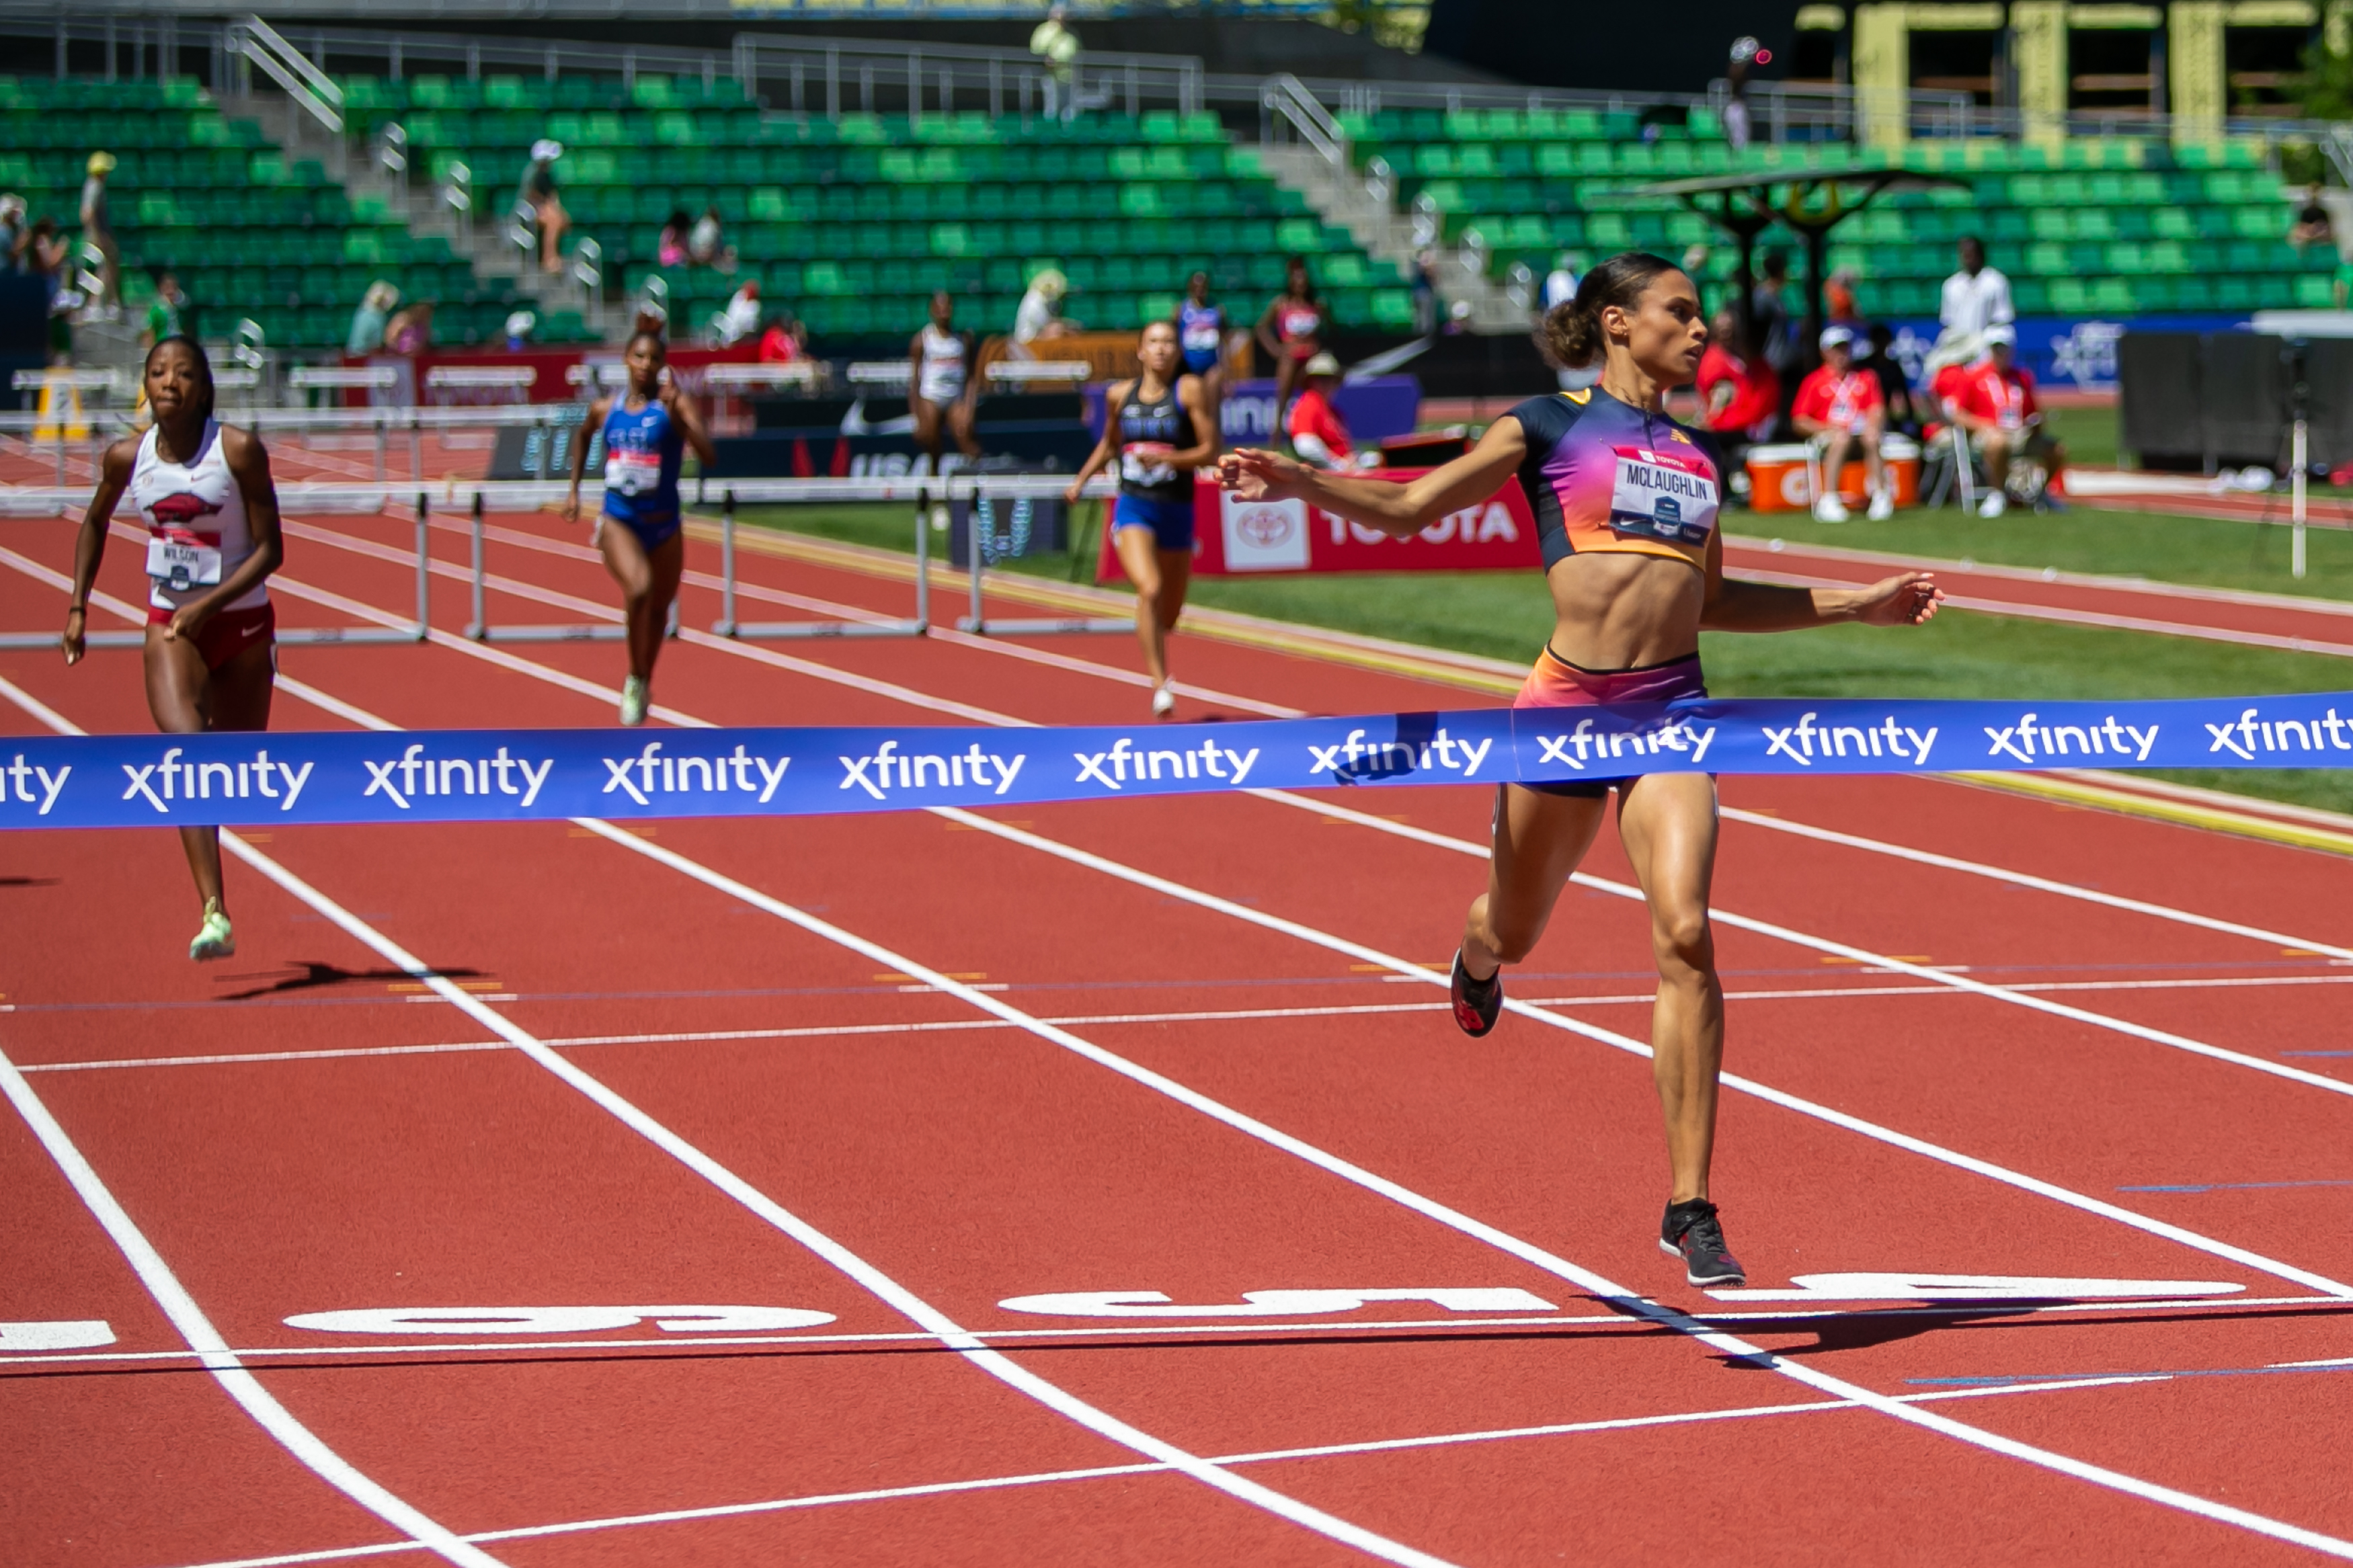 Sydney McLaughlin, Athing Mu 19 other U.S. track & field stars to watch at Championships Oregon22 - oregonlive.com